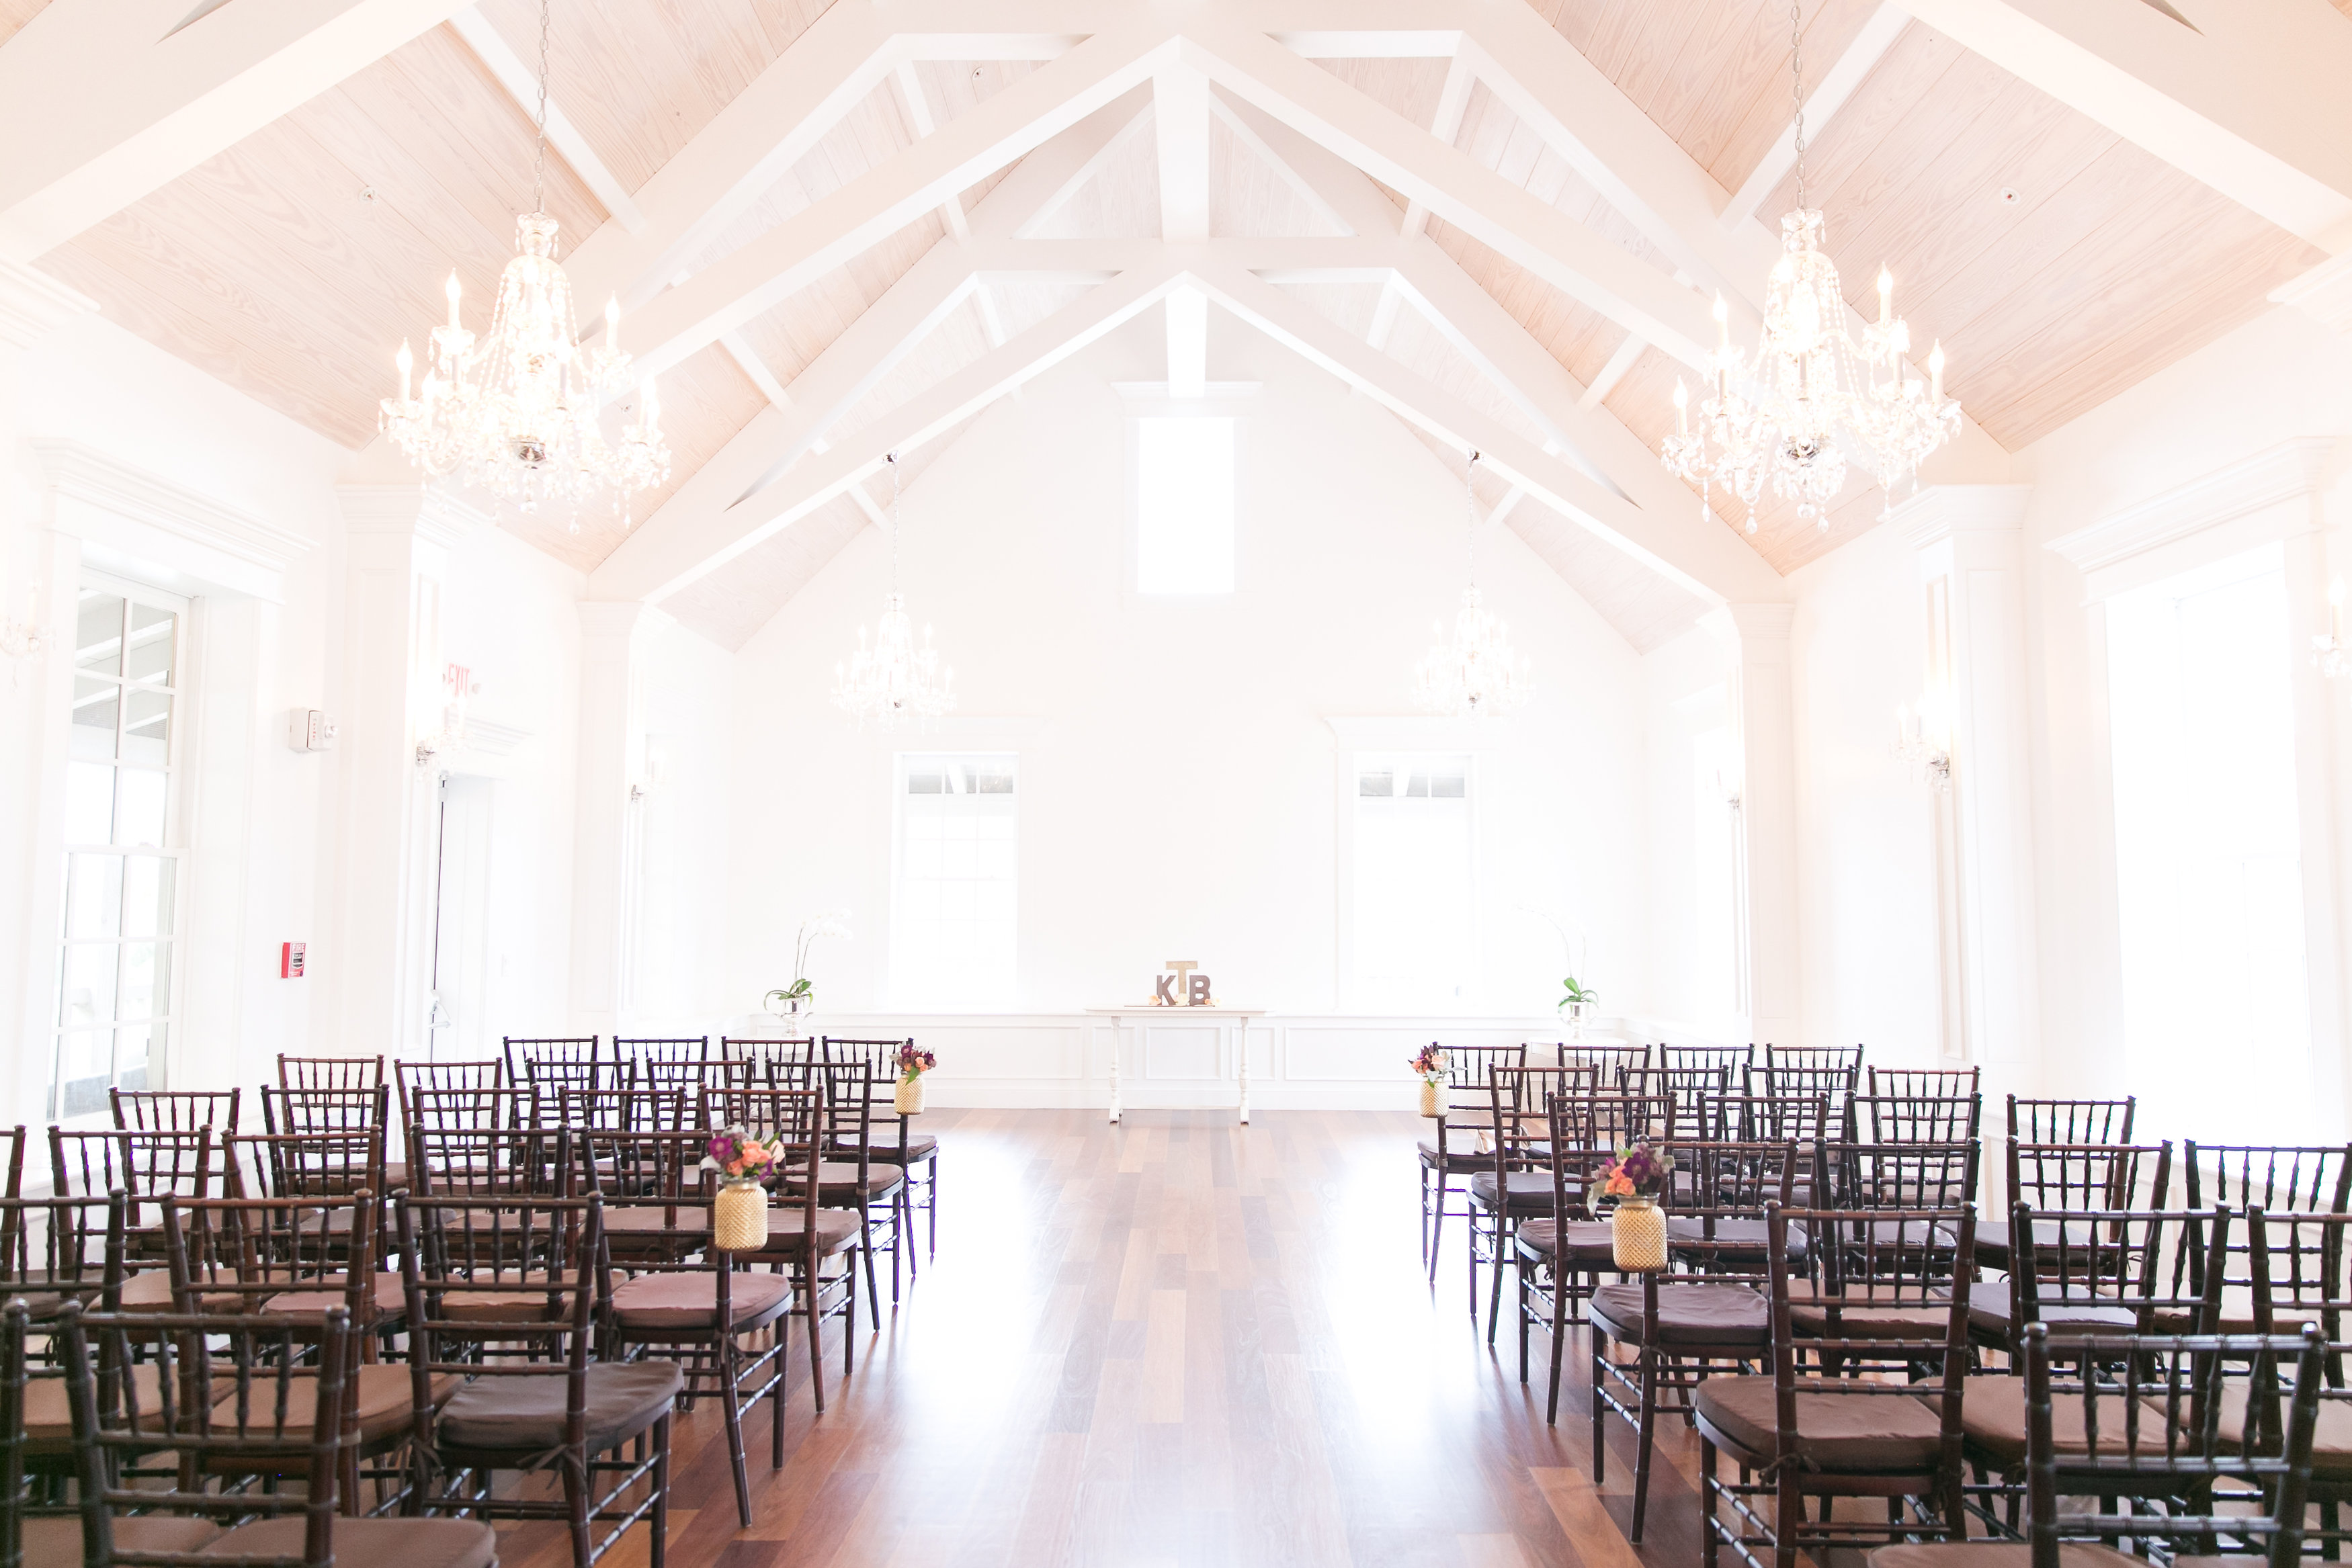 The White Room is an award winning full service private event and wedding venue located in the Heart of Historic Downtown St. Augustine